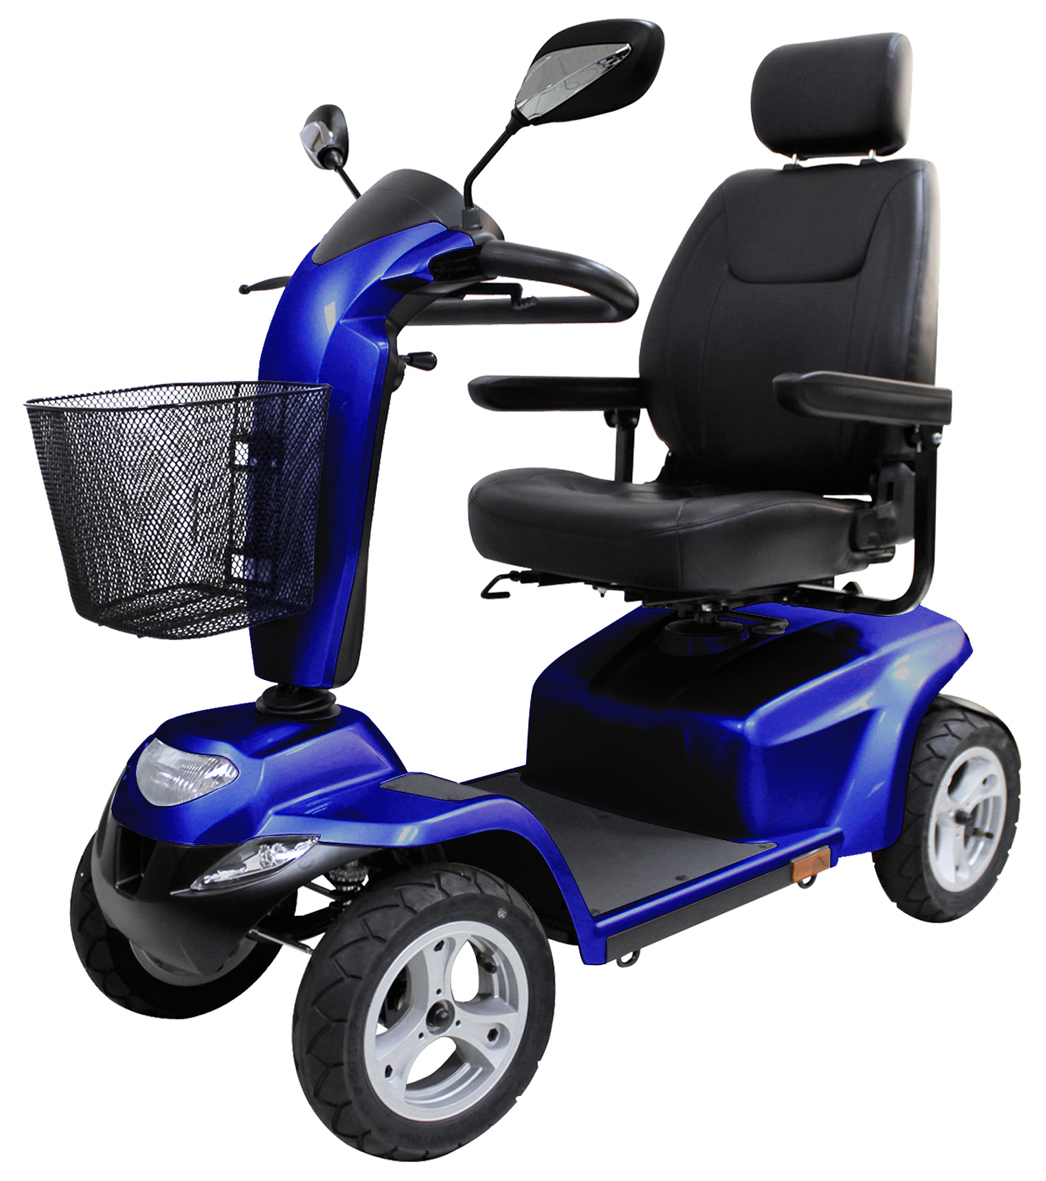 Mobility Scooters: CTM HS-898 Mobility Scooter